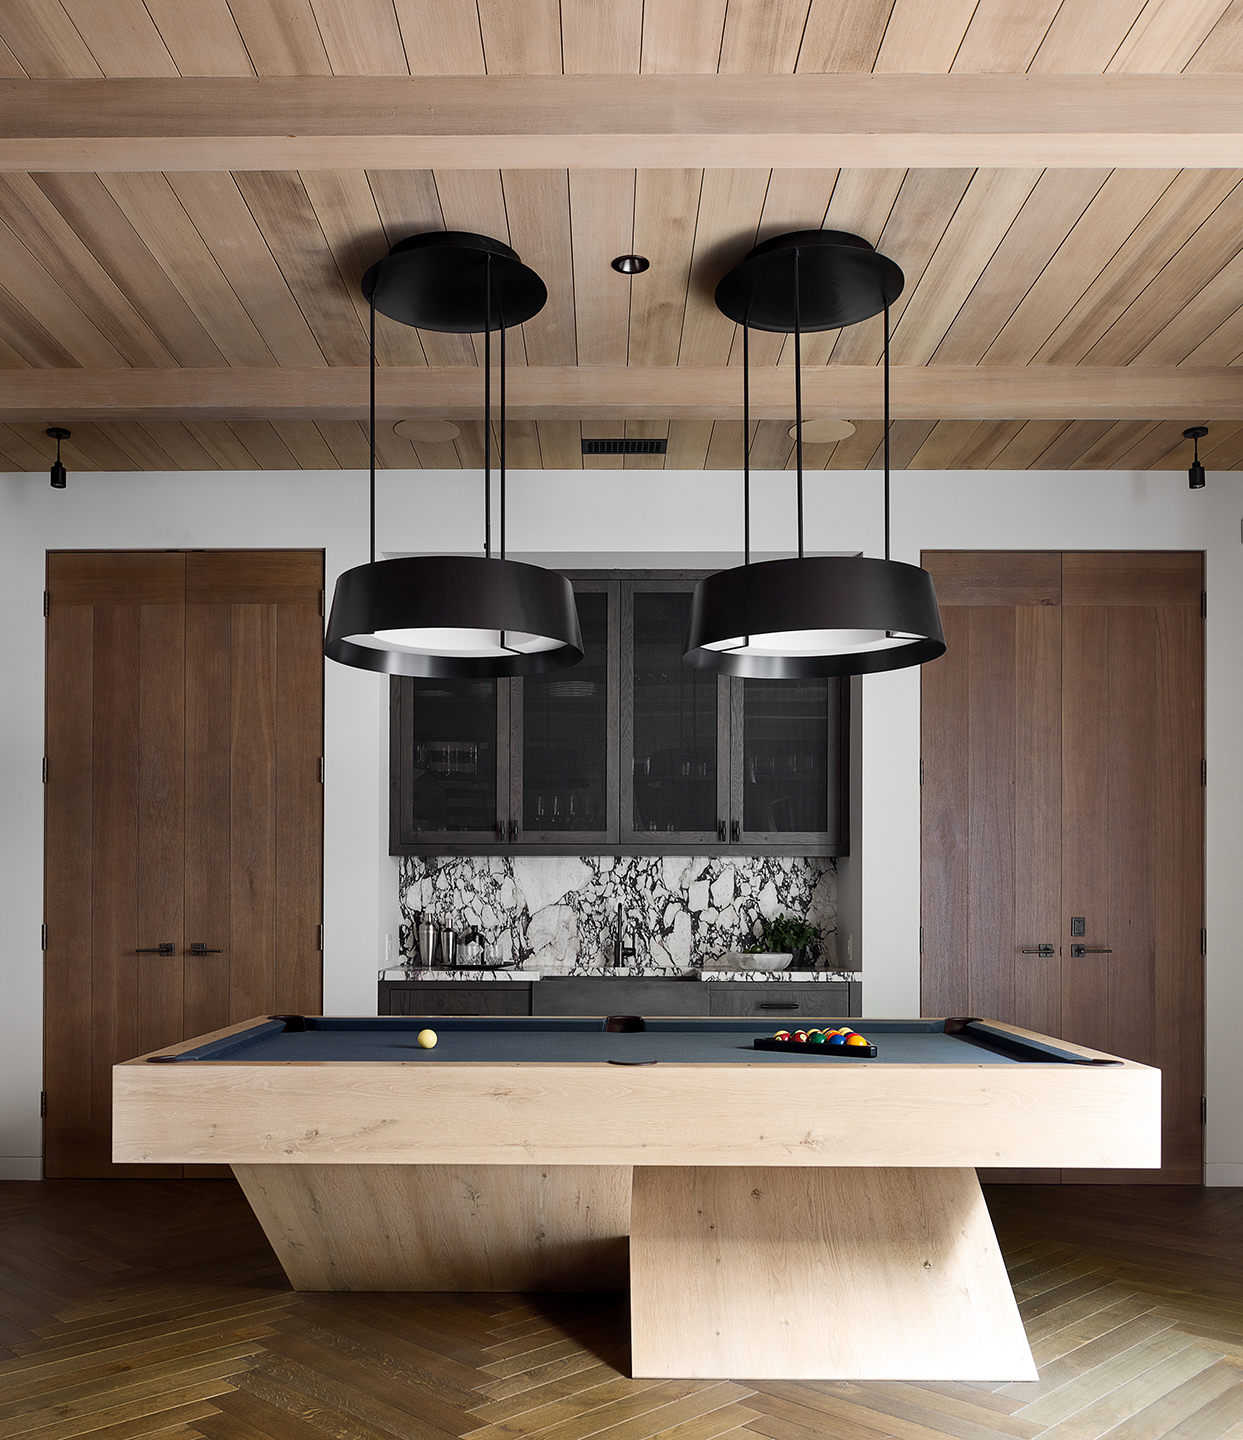 Jennifer-Robin-Interiors-Project-Modern-Country-Estate-11-Billiards-Table-Family-Room